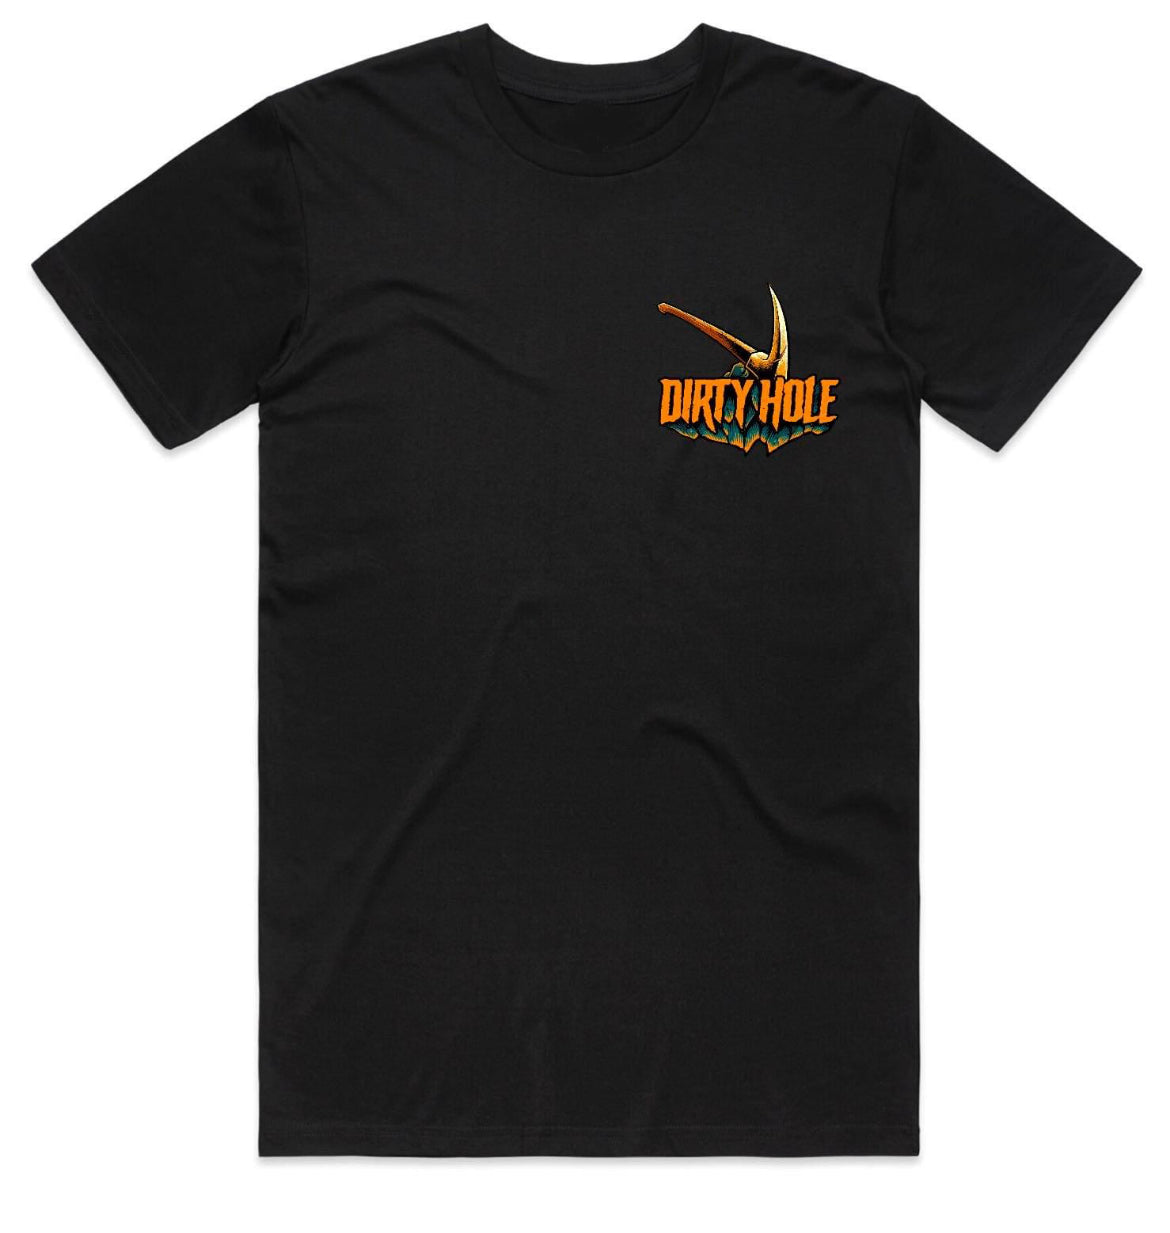 Save It For Night Shift men’s tee